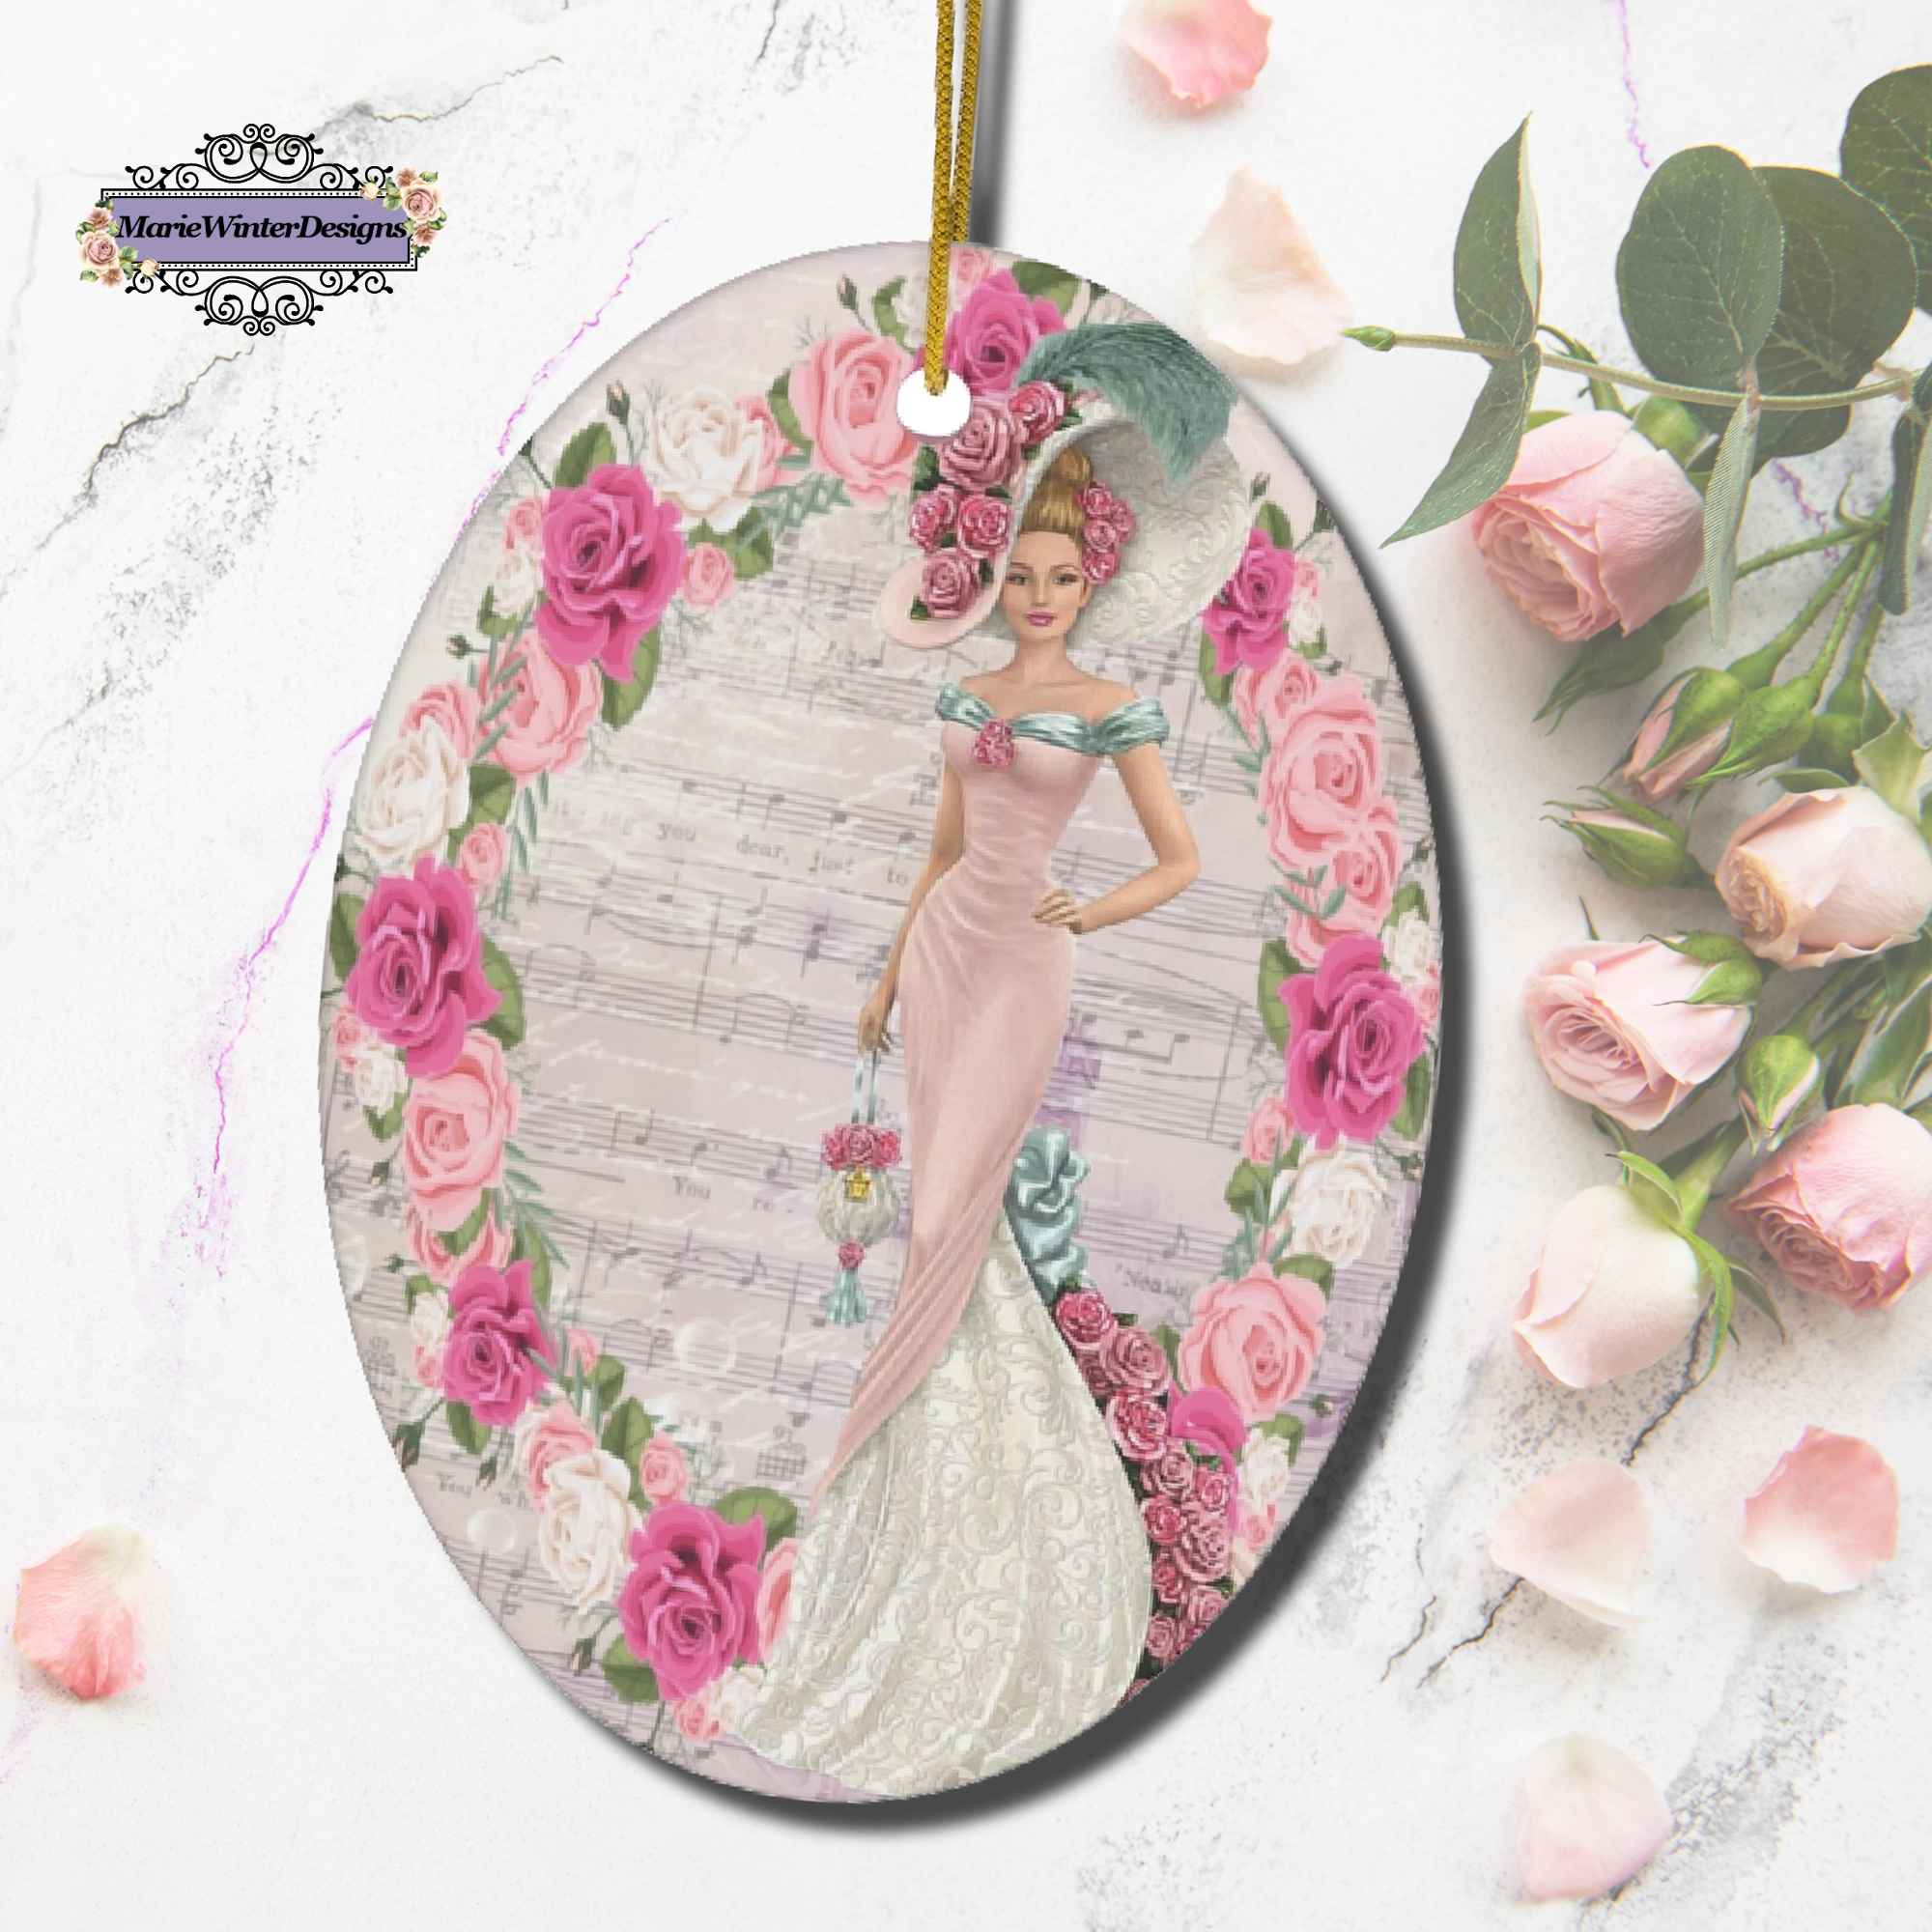 Oval ceramic ornament with Edwardian Lady with large hat music sheet background surrounded with pink and white roses